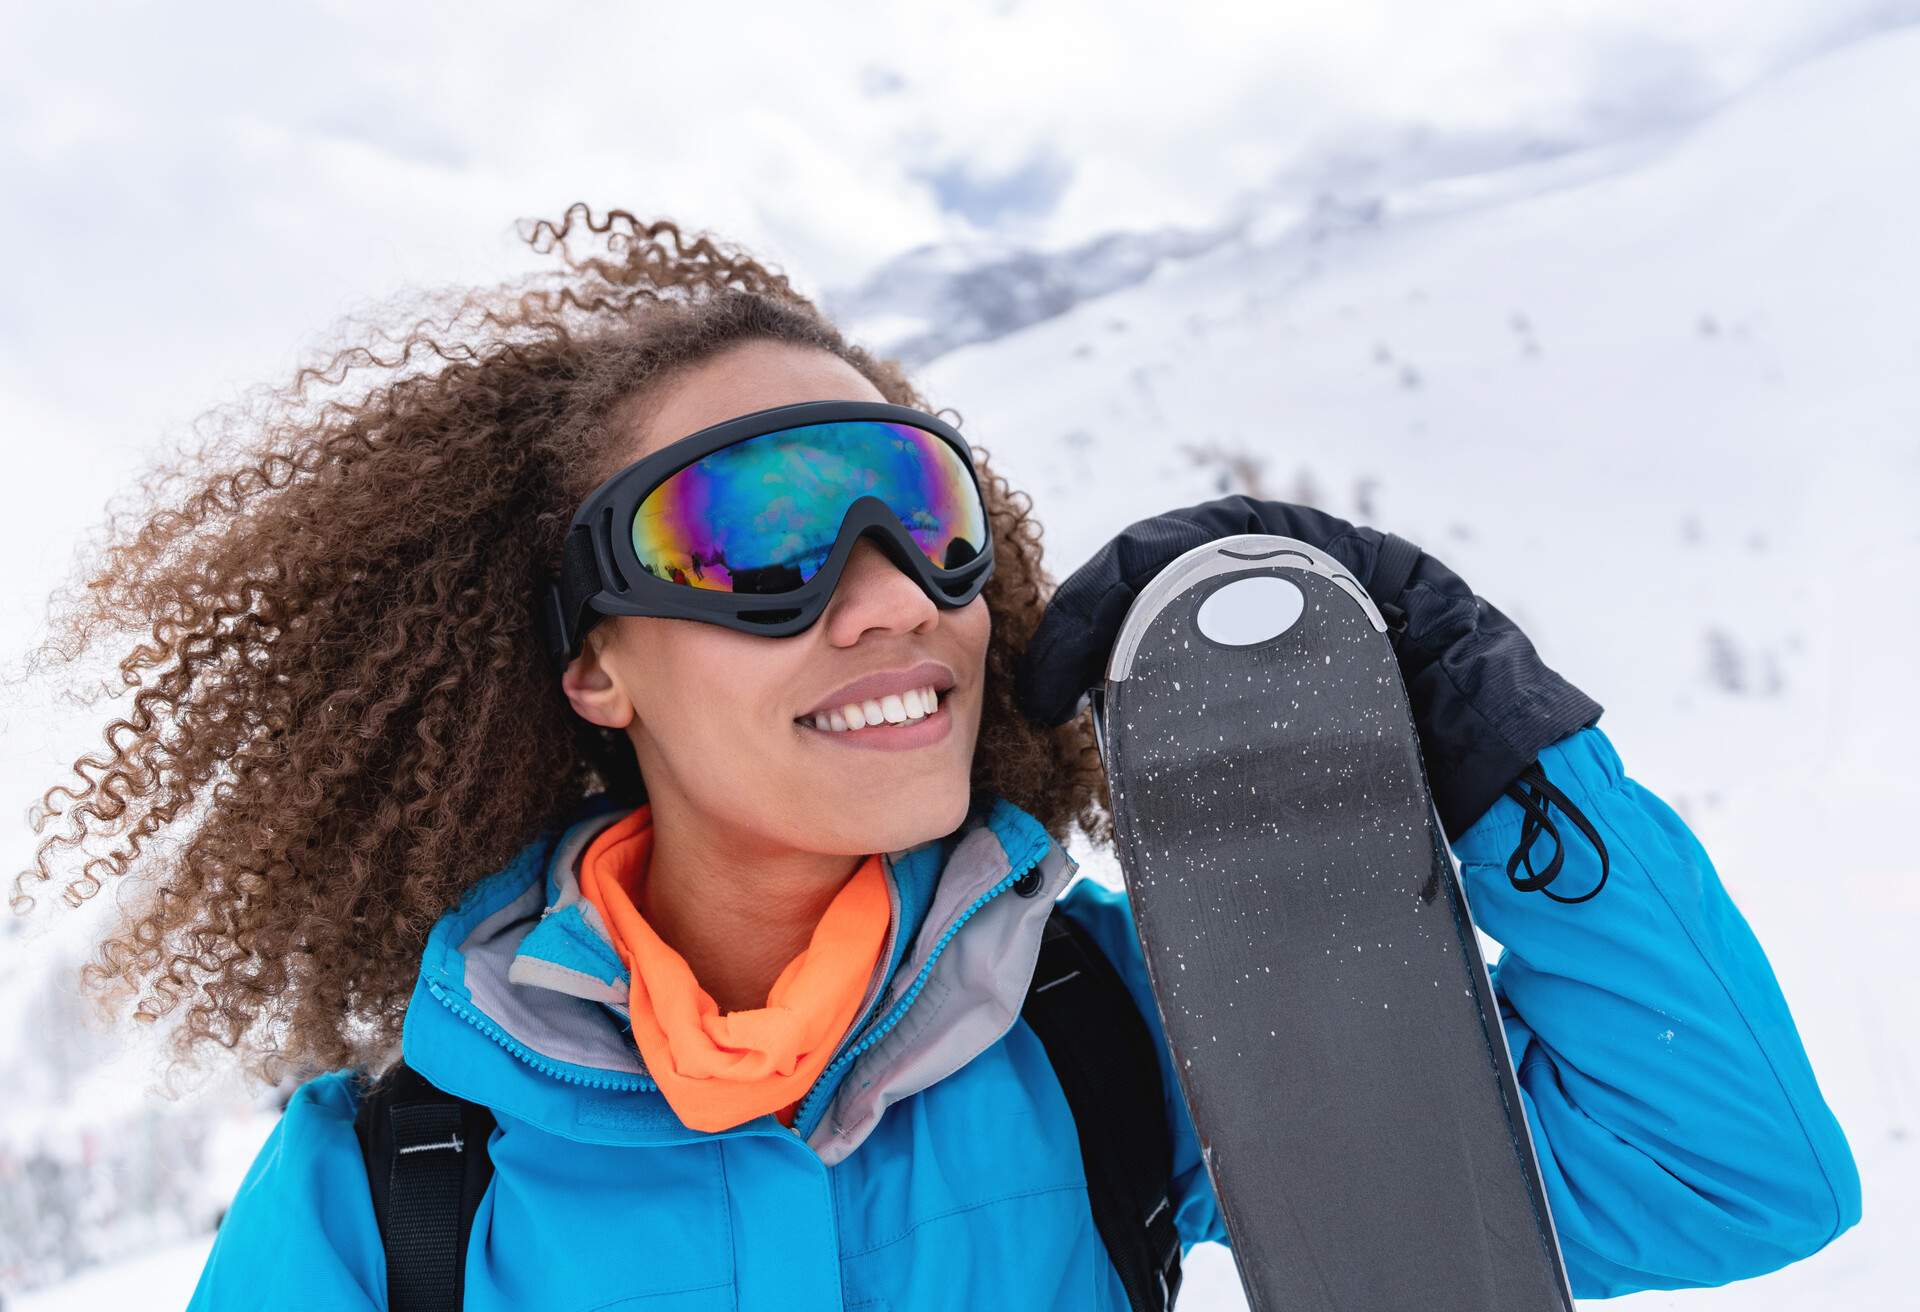 African American female skier looking very happy in the mountains enjoying the snow and holding her skies while wearing goggles and smiling